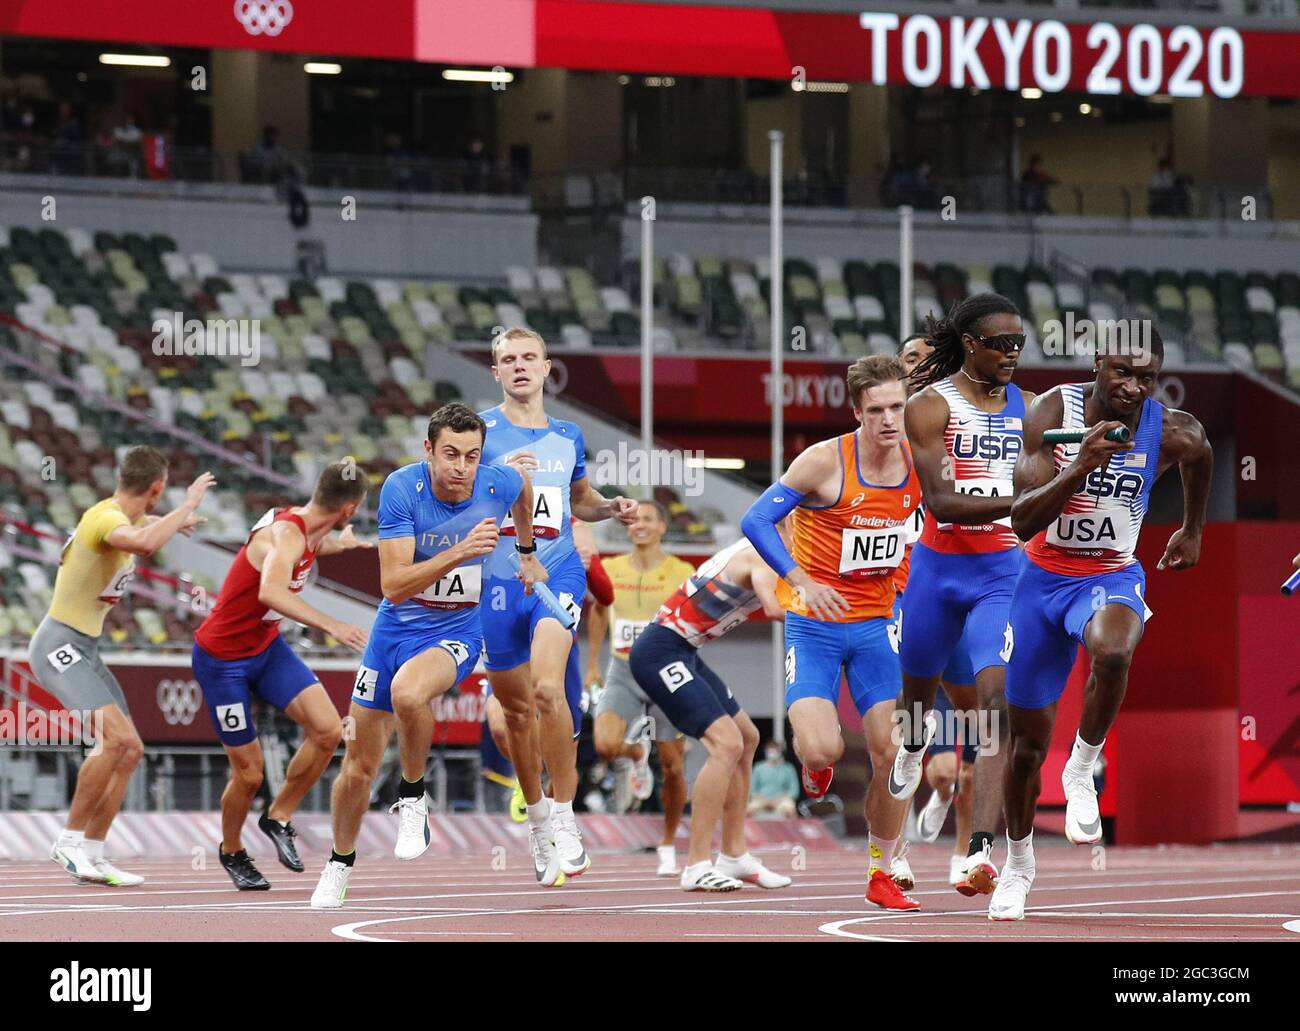 Tokyo, Japan. 06th Aug, 2021. Team Italy (L), Team Netherland's (C) and Team USA pass the baton in the Men's 4x100 Relay Finals at the Athletics competition during the Tokyo Summer Olympics in Tokyo, Japan, on Friday, August 6, 2021. Italy won the gold medal, Great Britain placed second and Canada came in third. Photo by Bob Strong/UPI. Credit: UPI/Alamy Live News Stock Photo